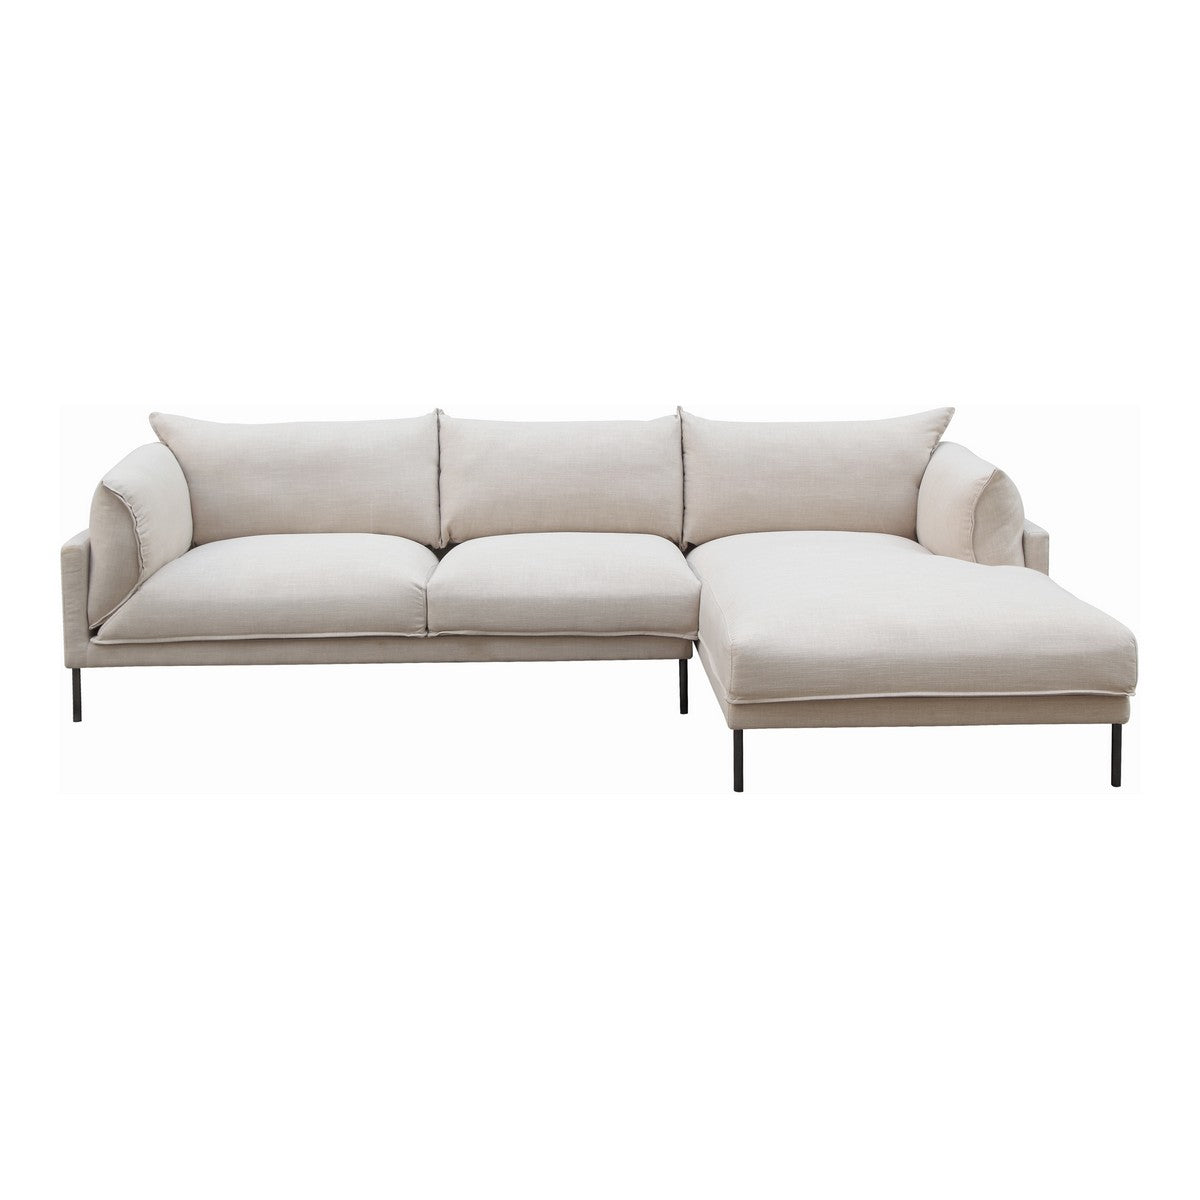 Moe's Home Collection Jamara Sectional Right Sandy Beige - UB-1016-29-R - Moe's Home Collection - sofa sectionals - Minimal And Modern - 1